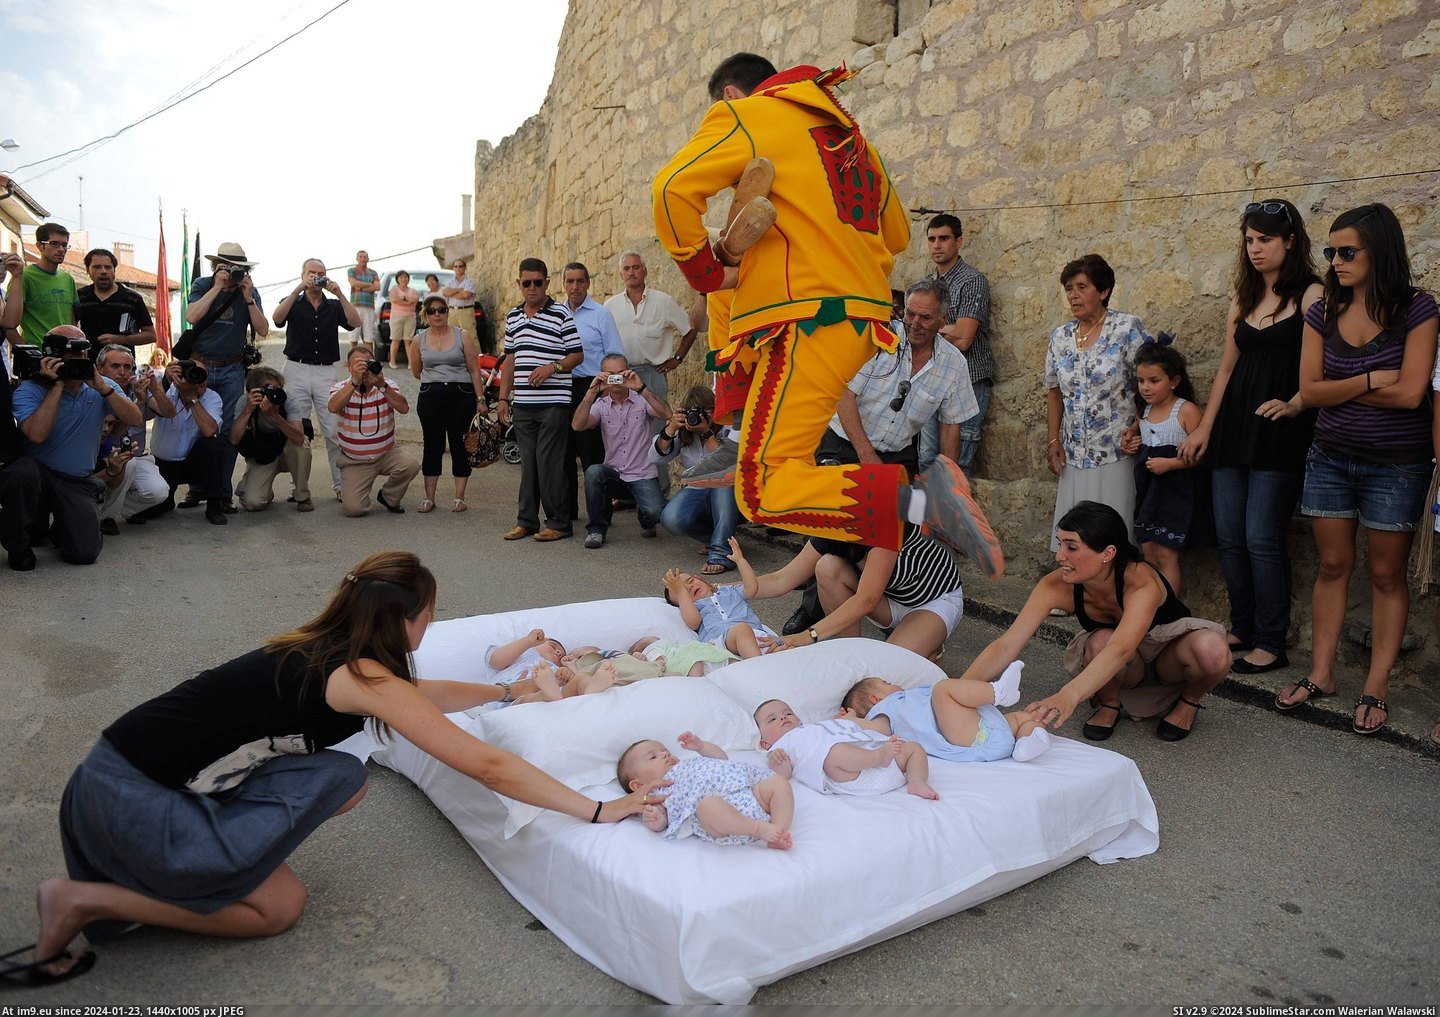 #Wtf #Baby #Festival #Spain #Jumping [Wtf] Baby Jumping Festival in Spain Pic. (Image of album My r/WTF favs))